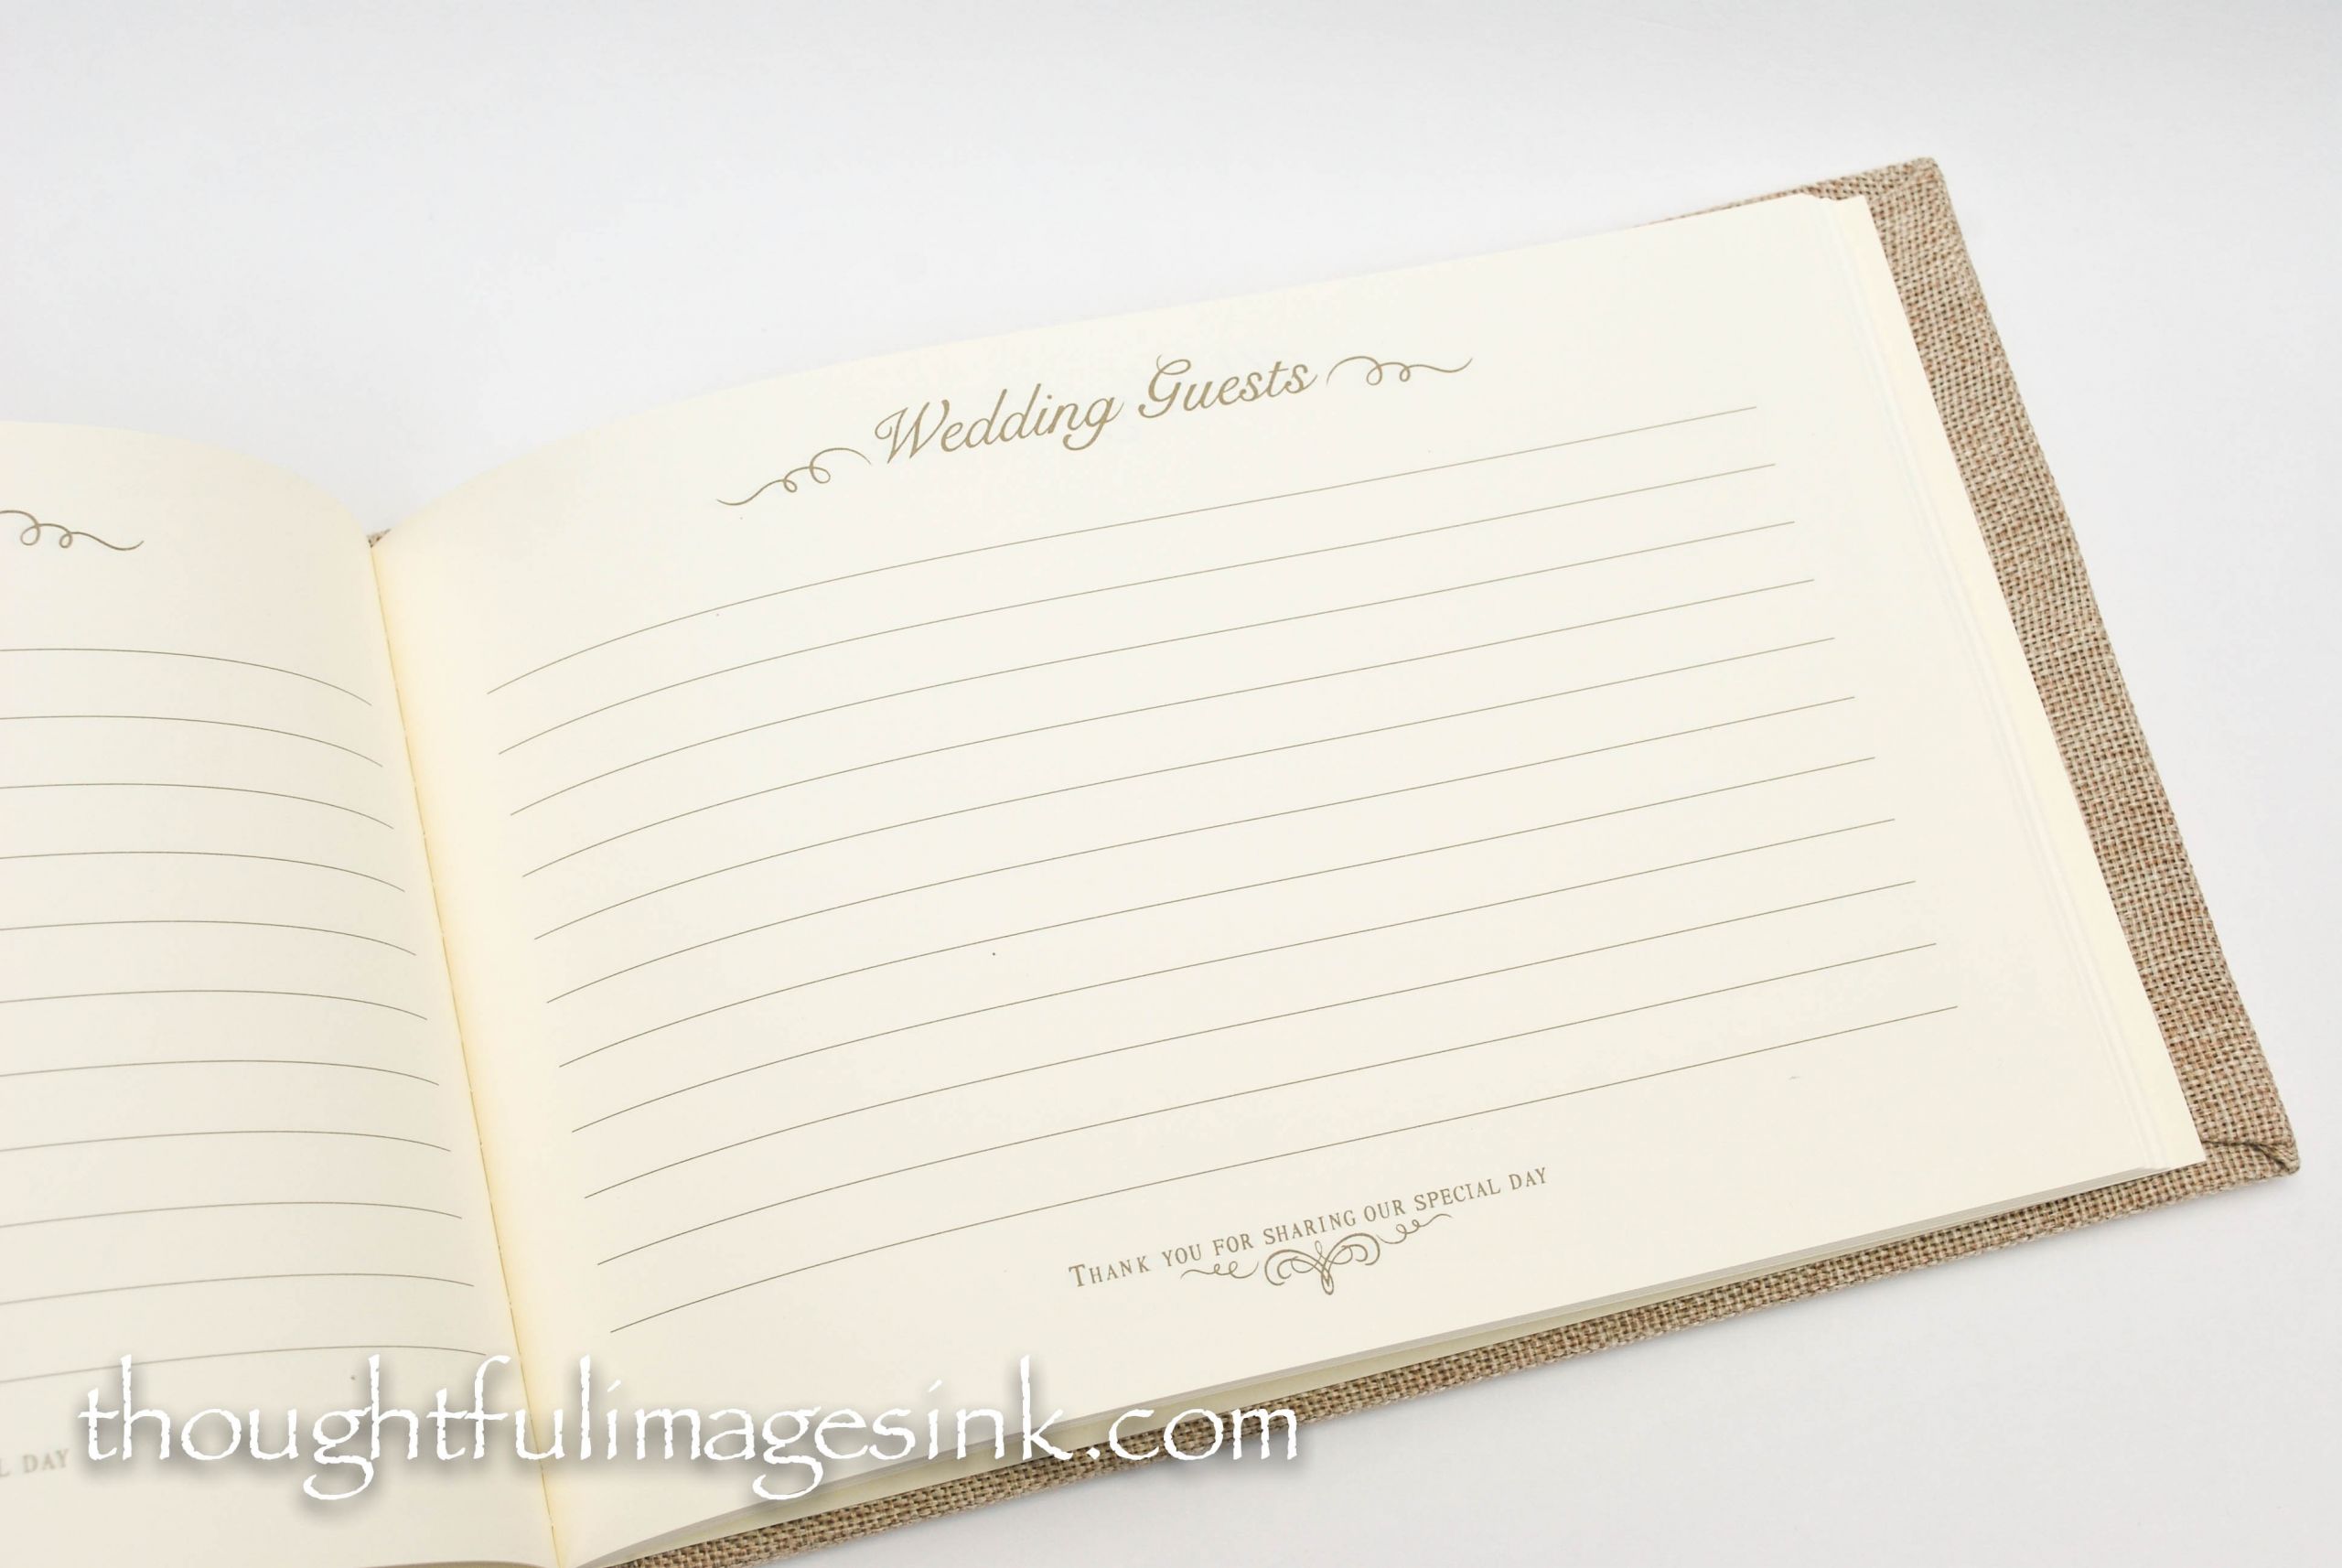 Wedding Guest Book Inside Pages
 Music Themed Wedding Guest Book Barb Ann Designs